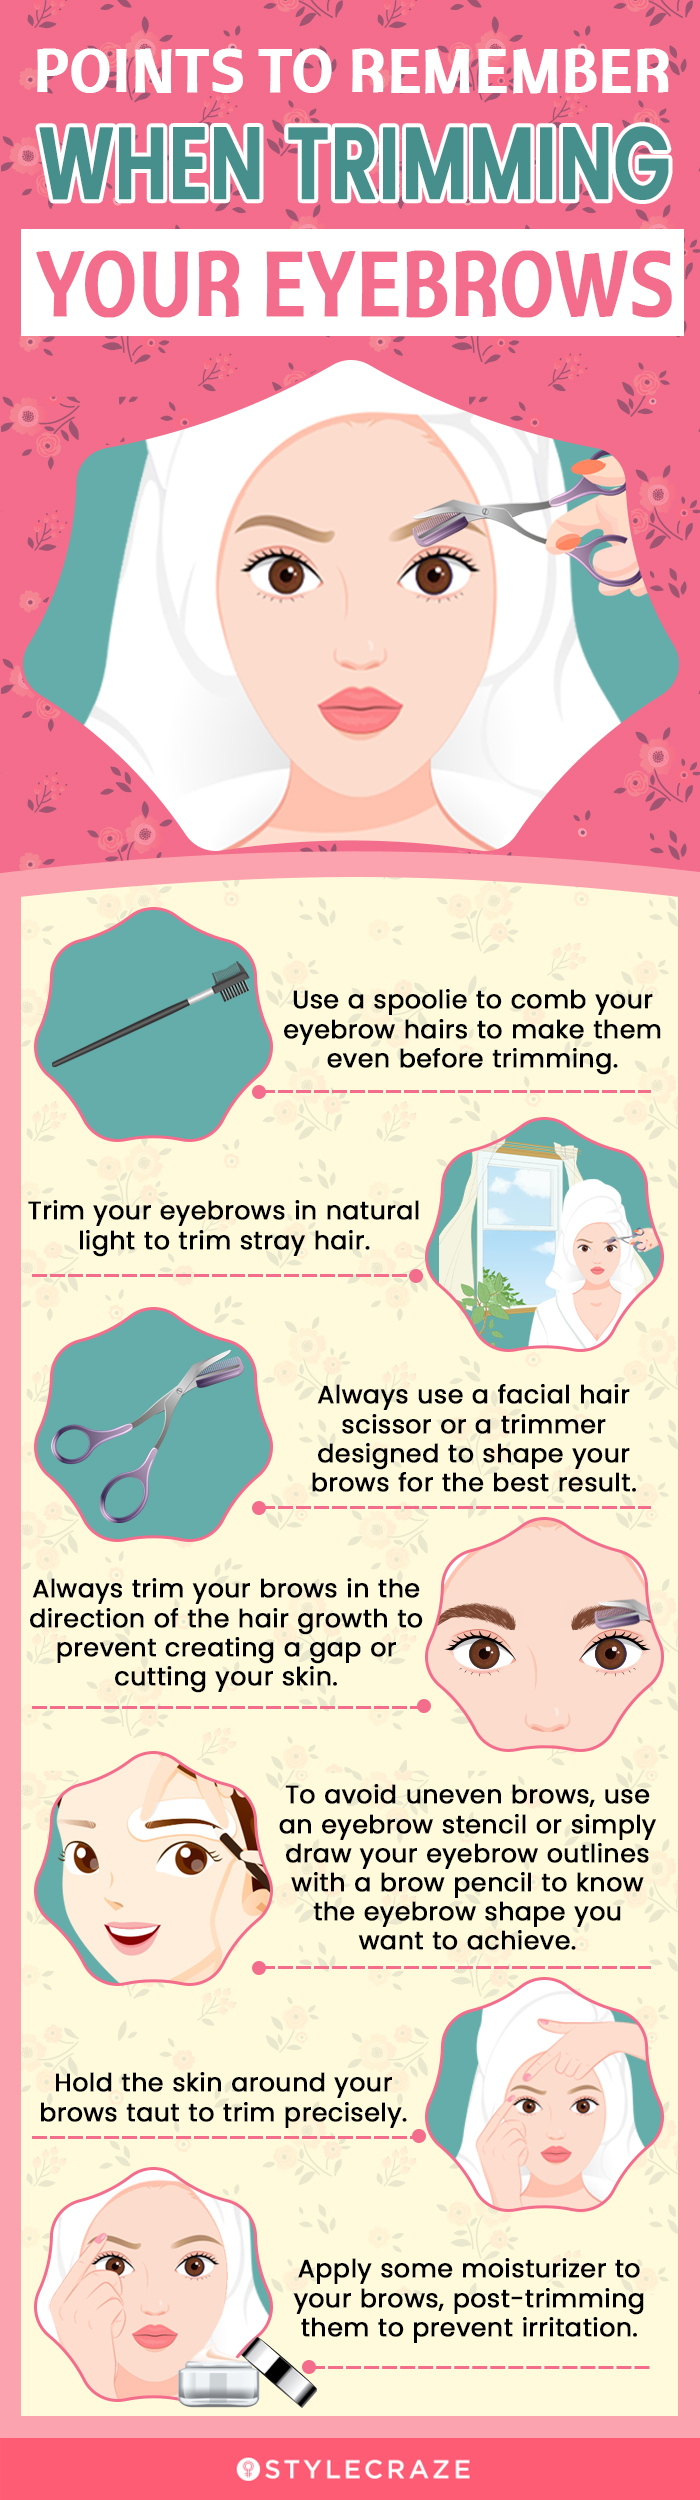 Points To Remember When Trimming Your Eyebrows (infographic)